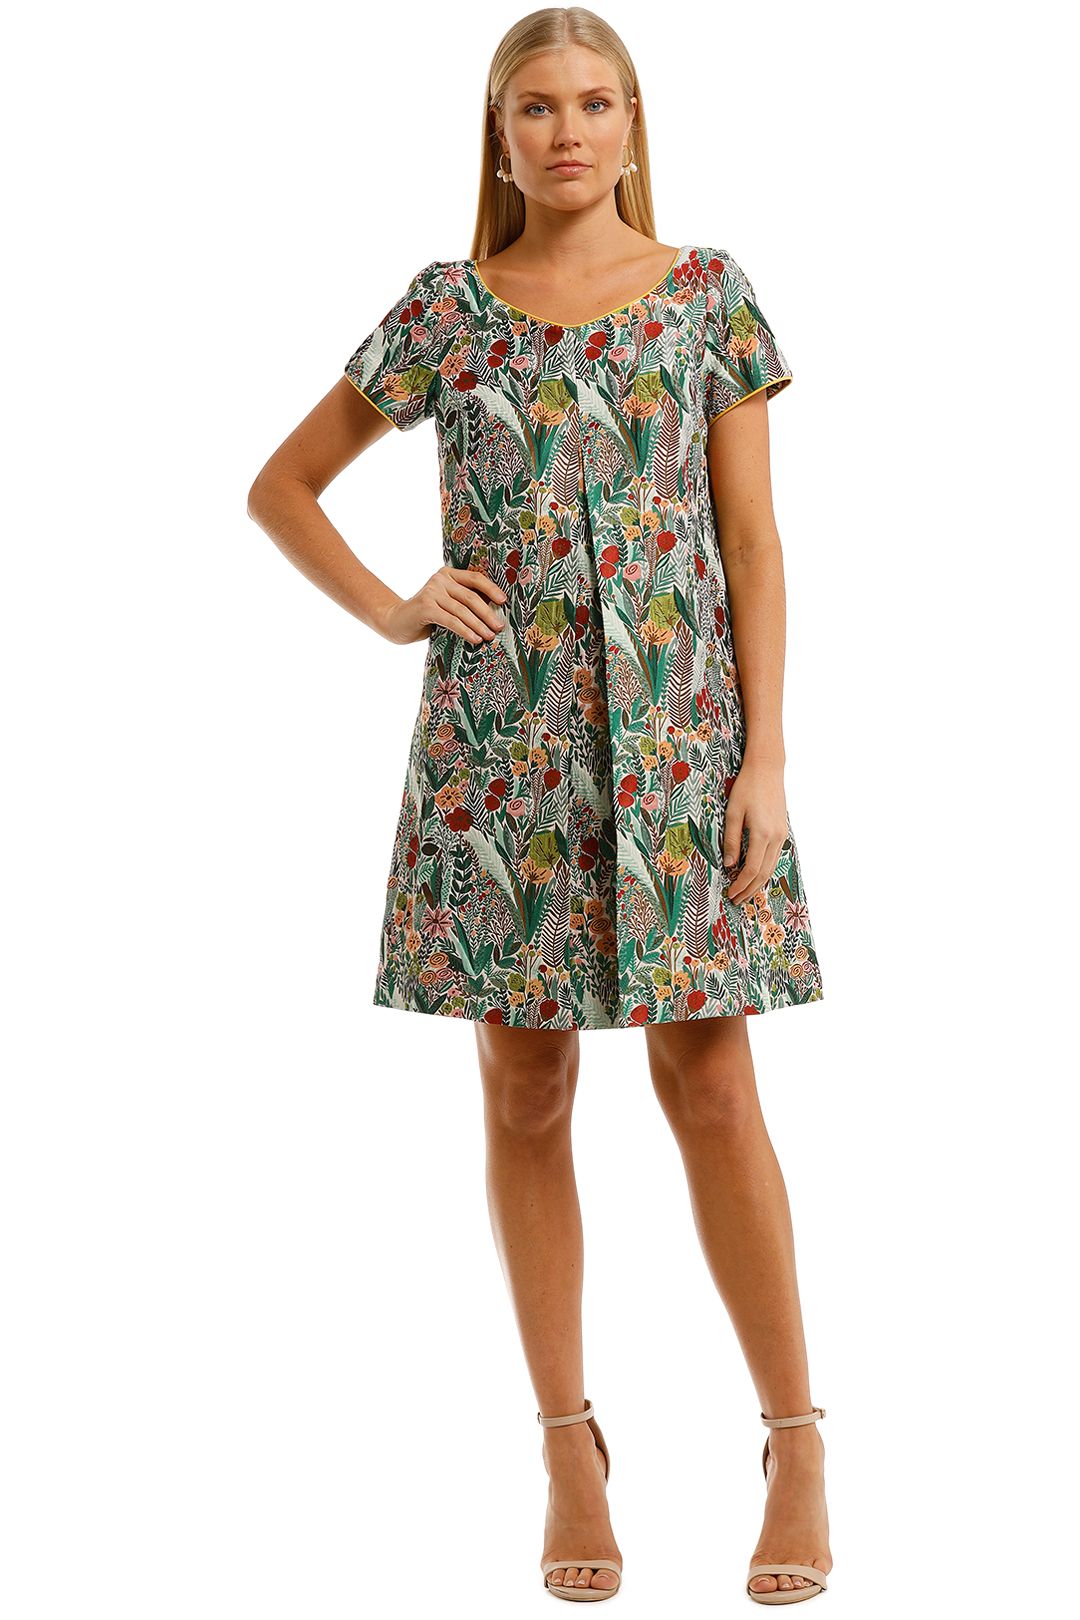 Cooper-By-Trelise-Cooper-Peony-For-Your-Thoughts-Dress-Green-Multi-Front